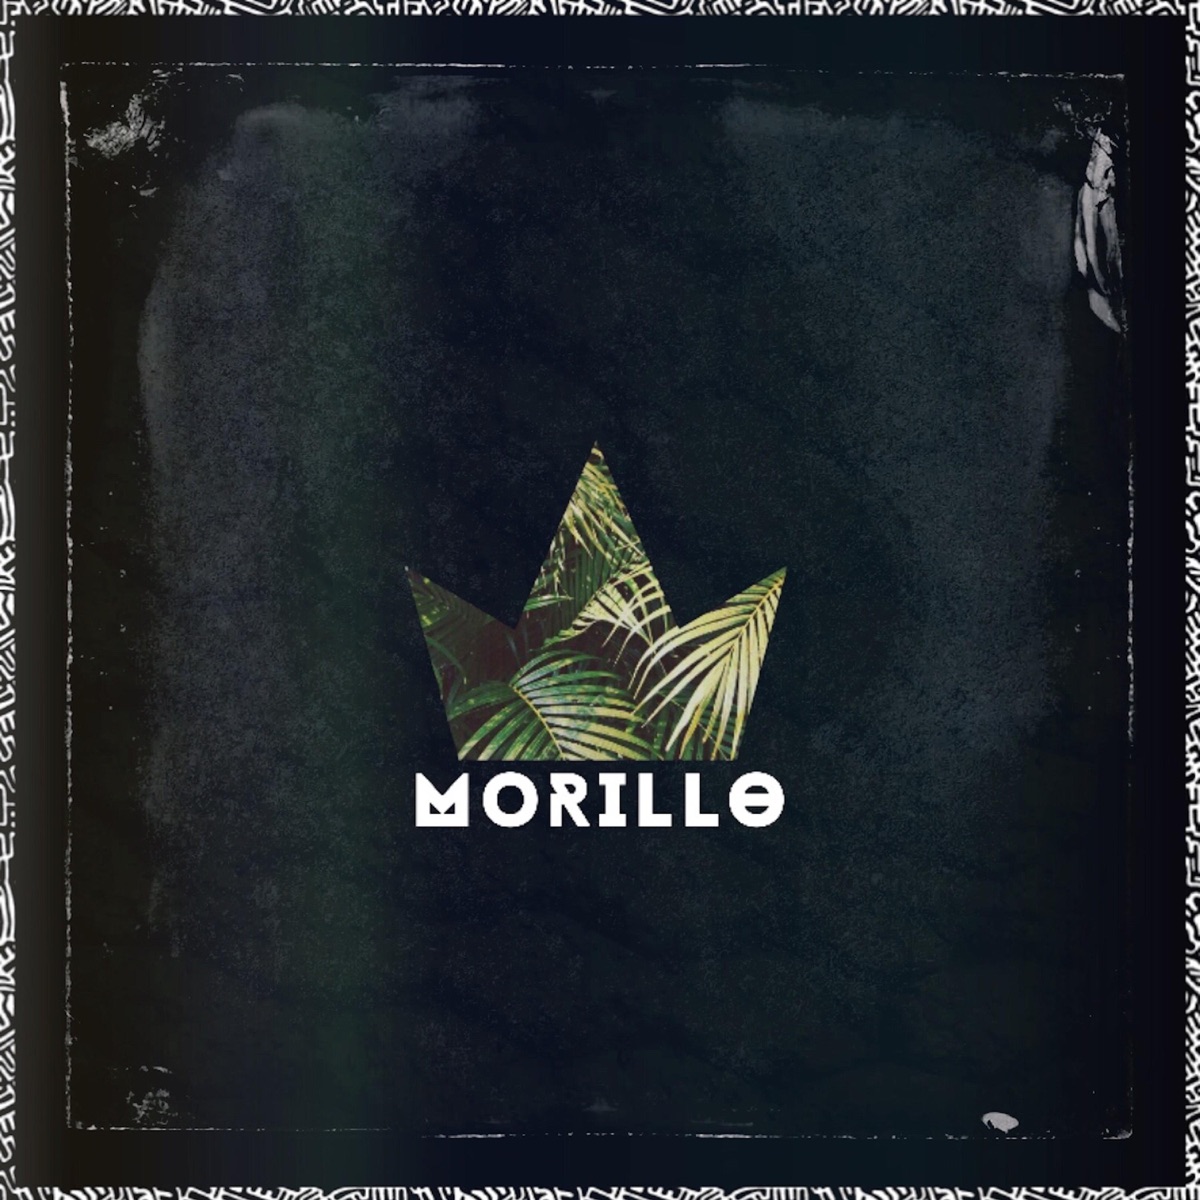 Makers Anthem - Single by Morillo on Apple Music